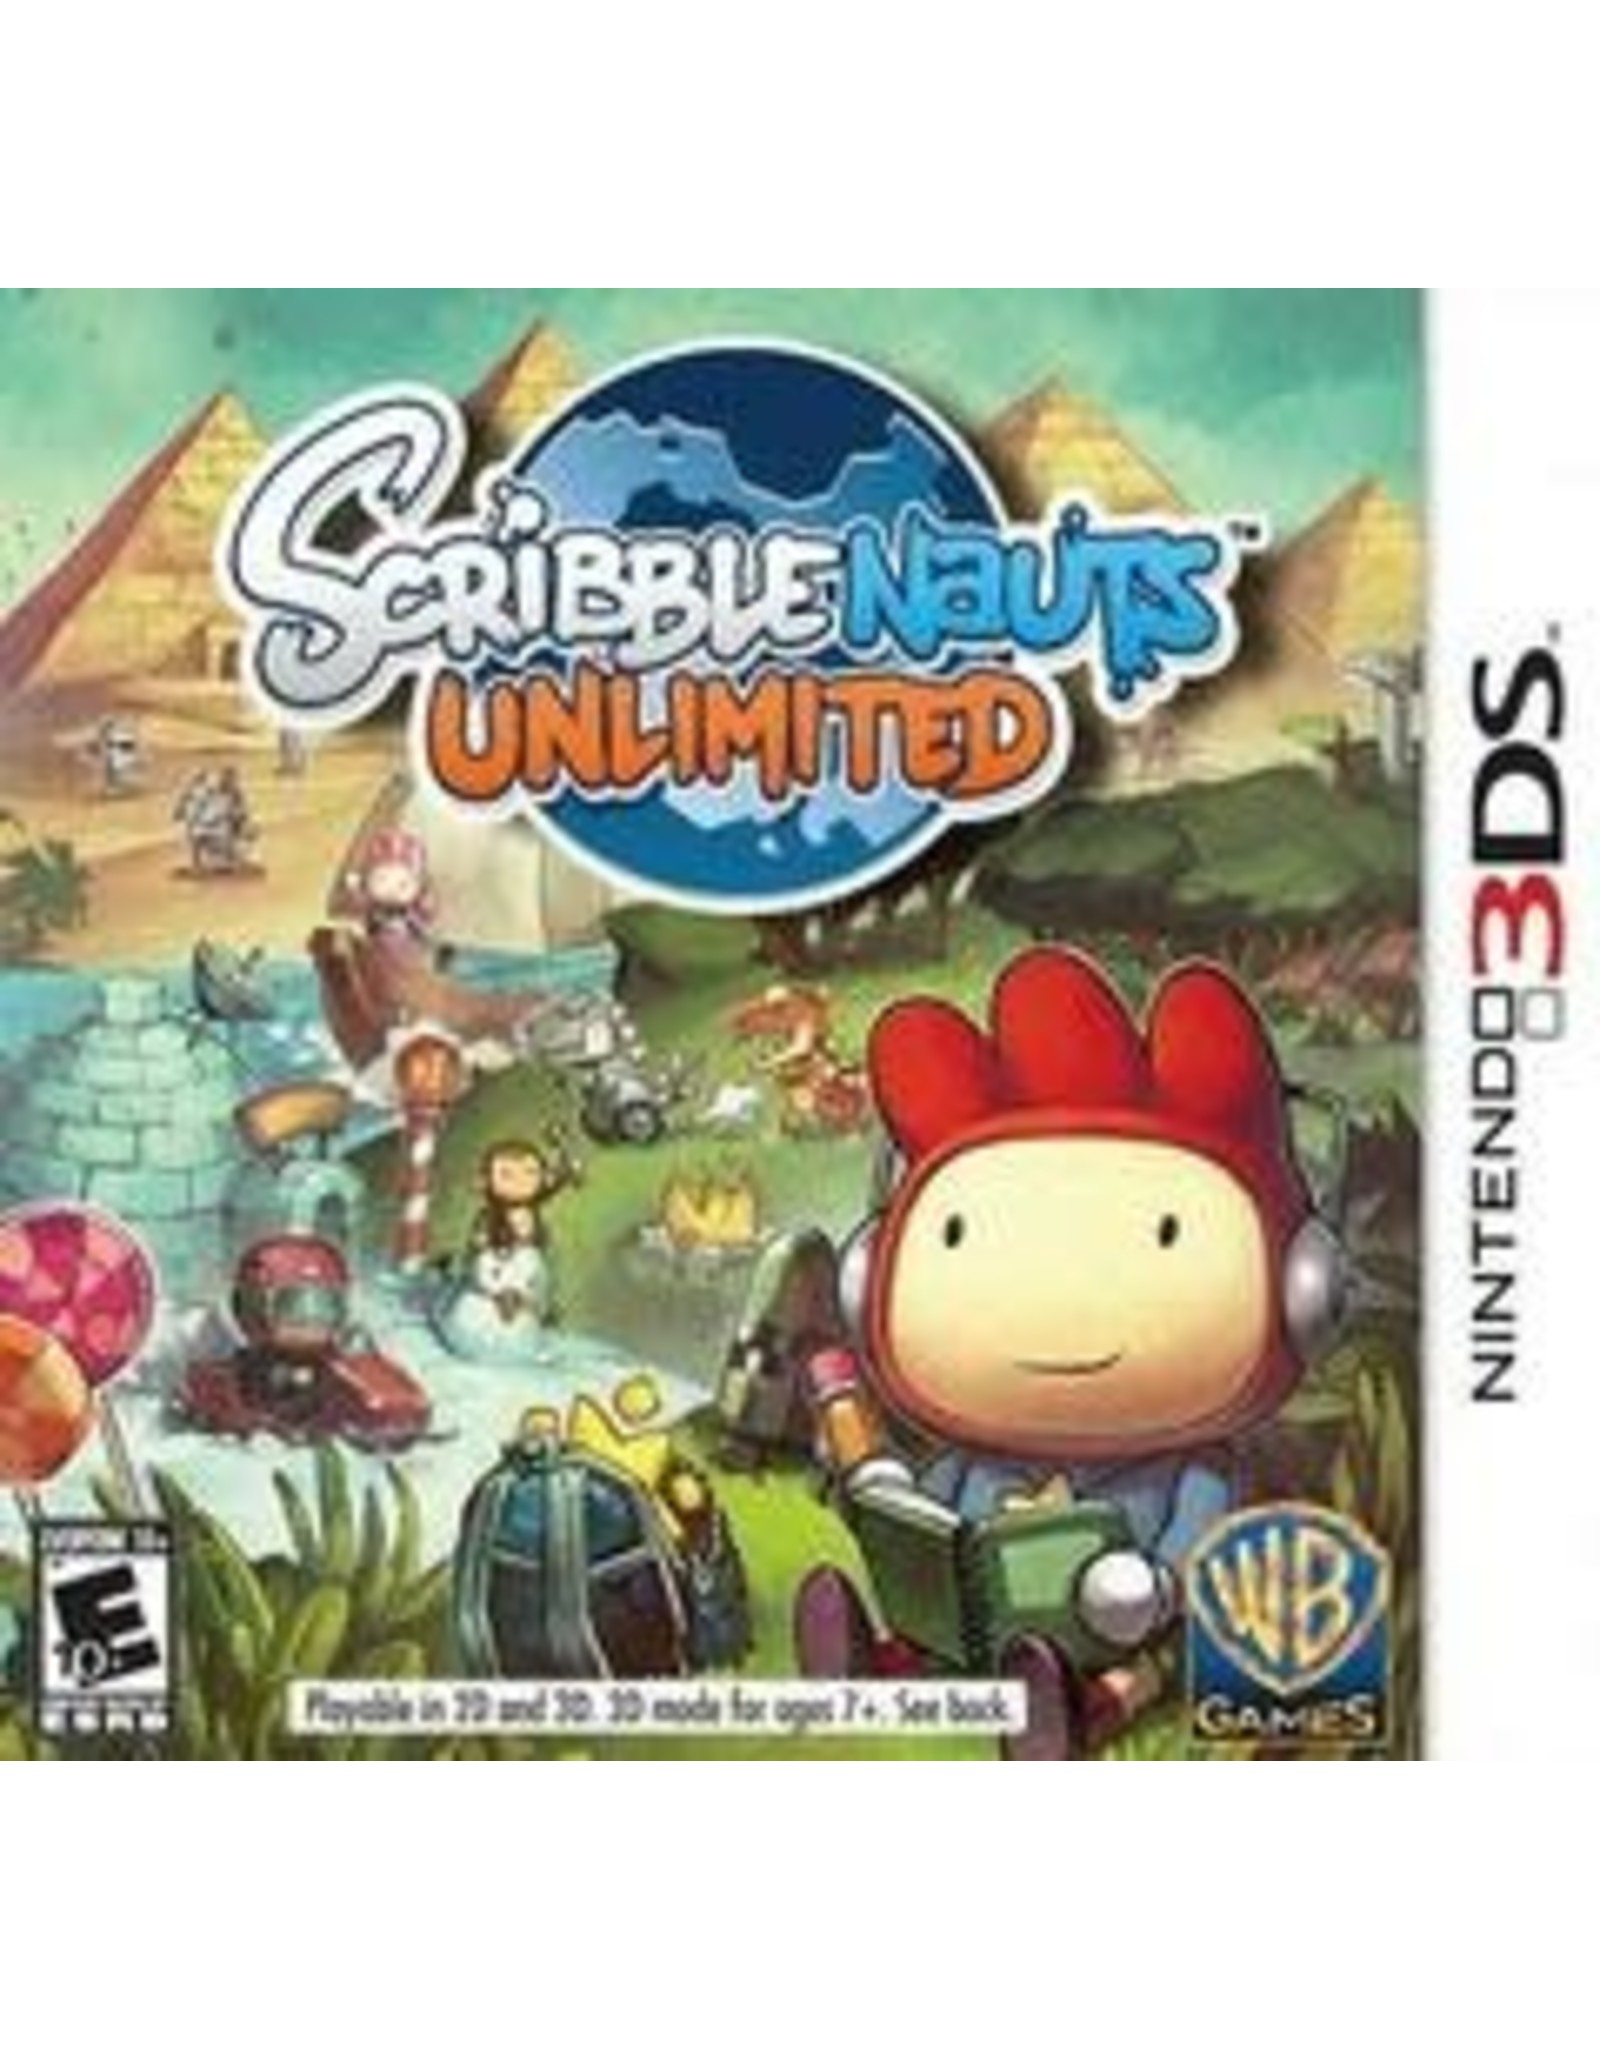 Nintendo 3DS Scribblenauts Unlimited (Cart Only)